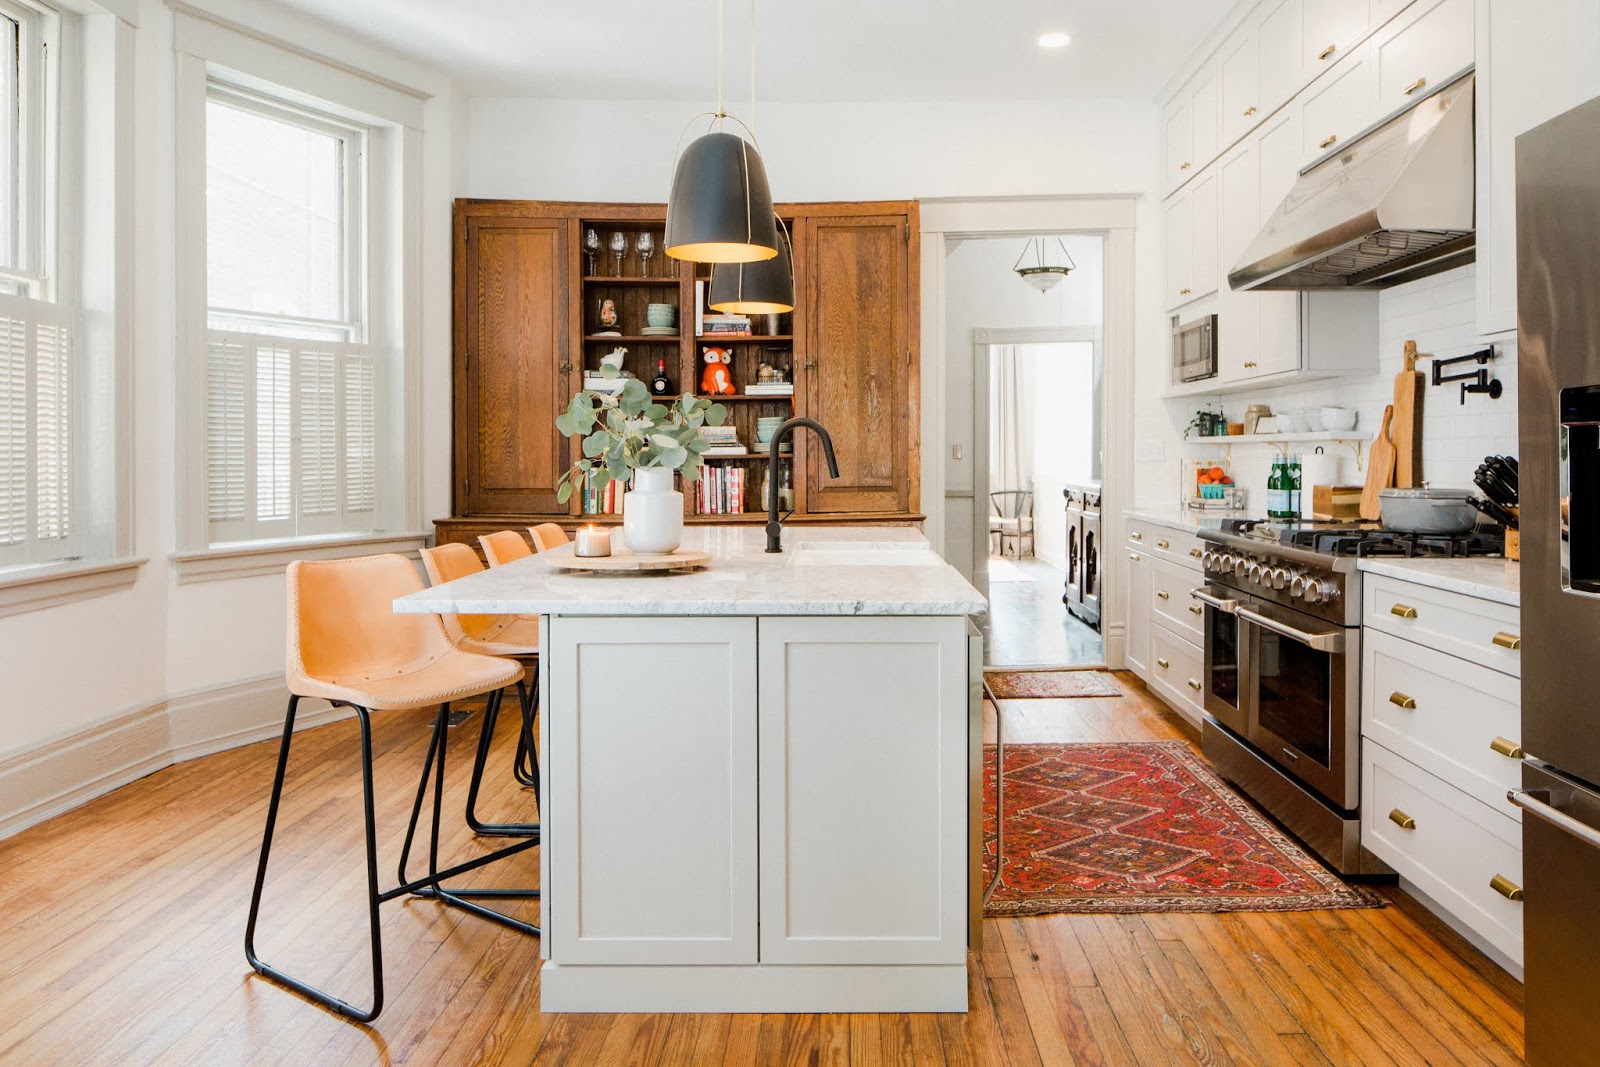 the reveal: our row house kitchen renovation is complete